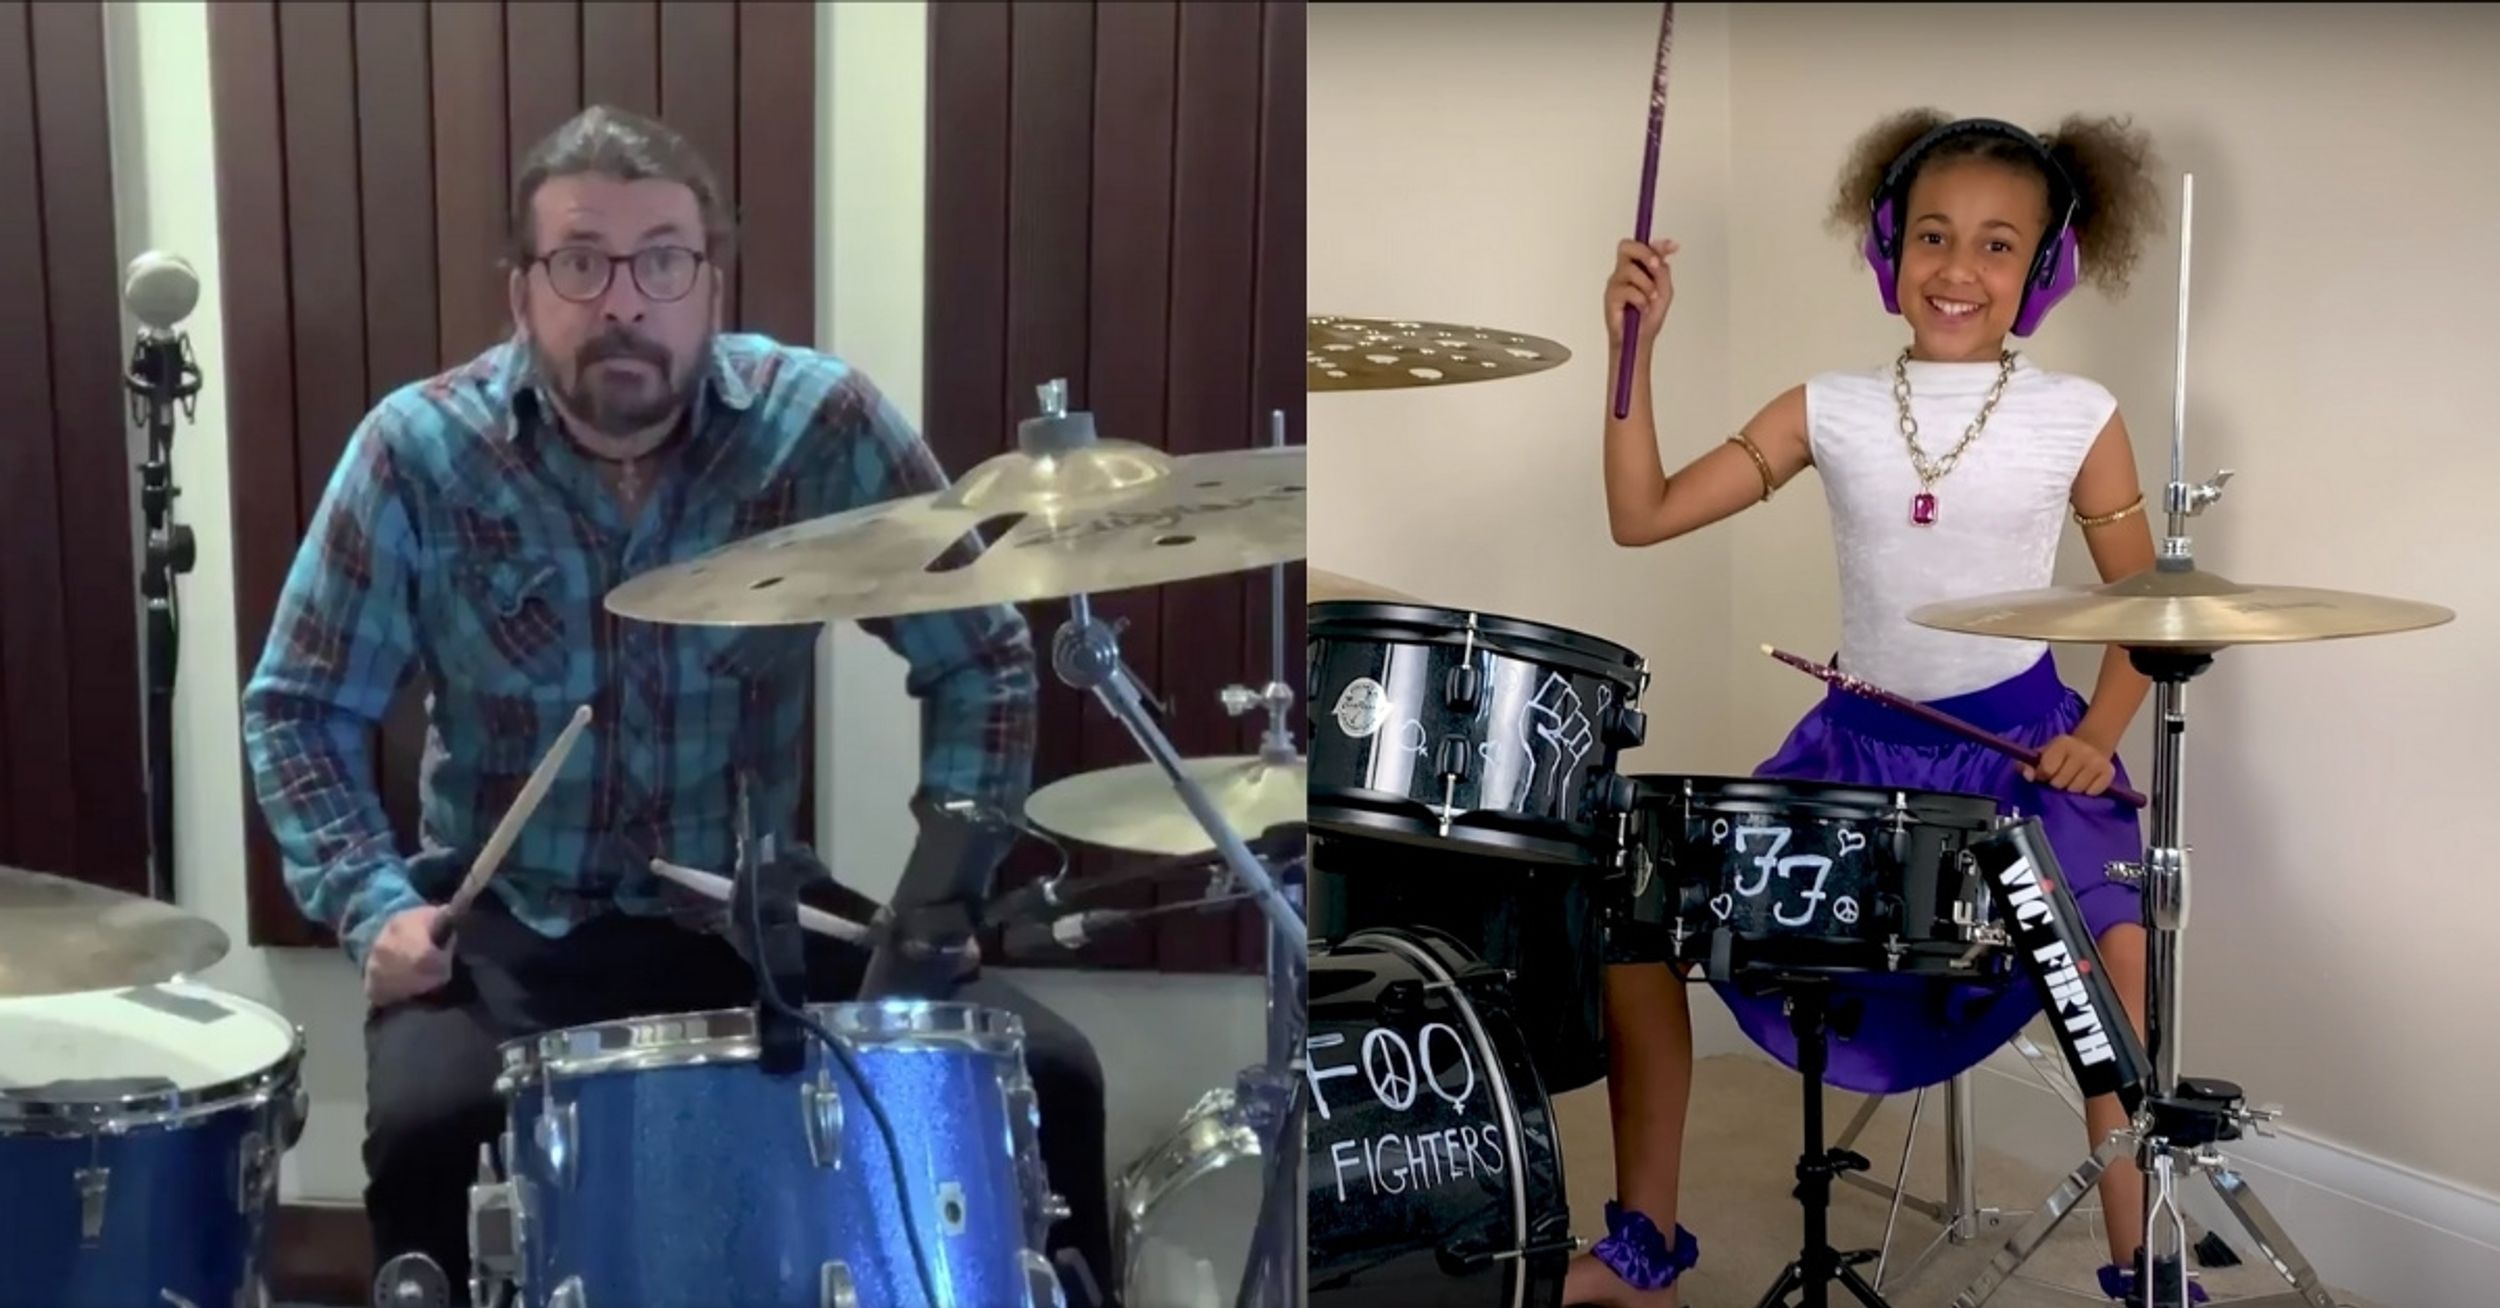 Dave Grohl Writes Epic Theme Song For 10-Year-Old Drumming Sensation He's Been Battling